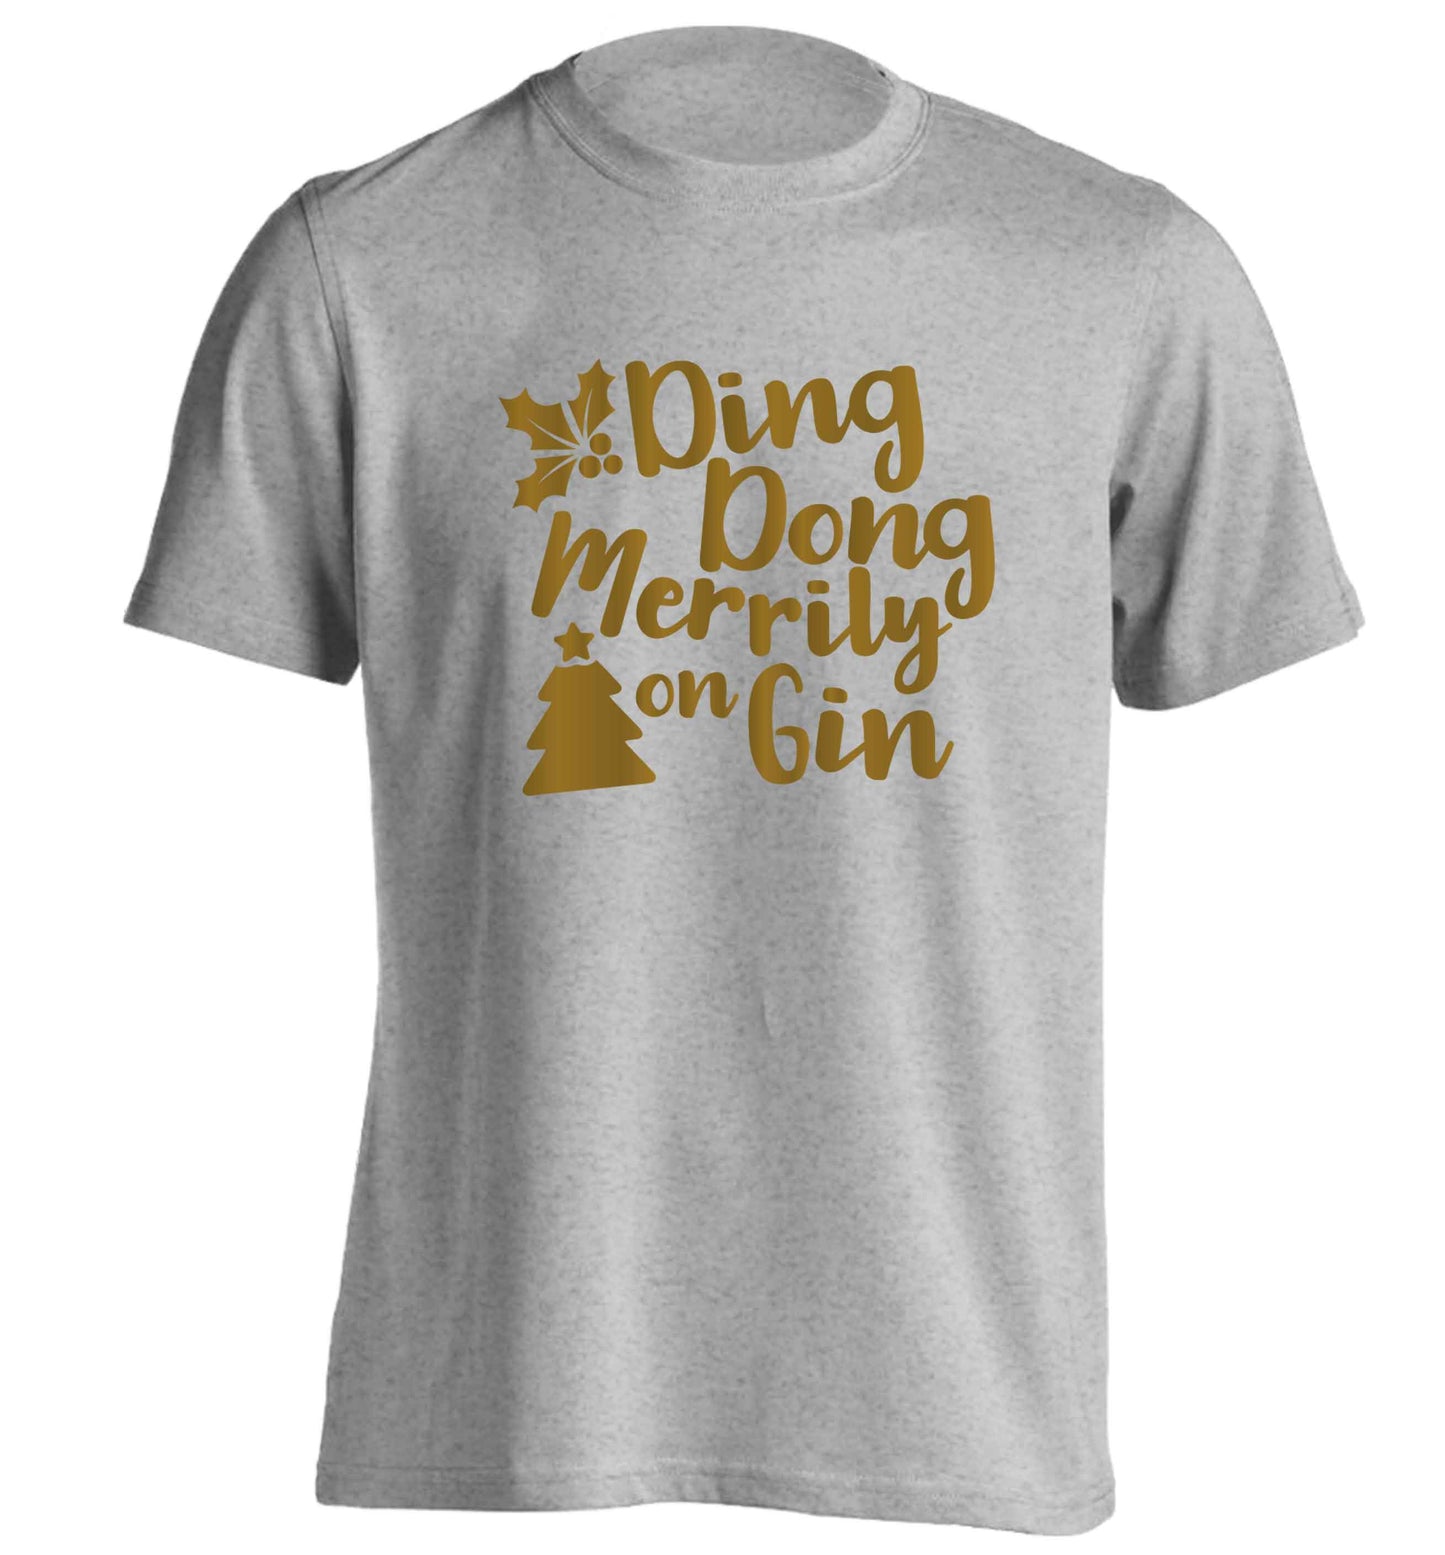 Ding dong merrily on gin adults unisex grey Tshirt 2XL